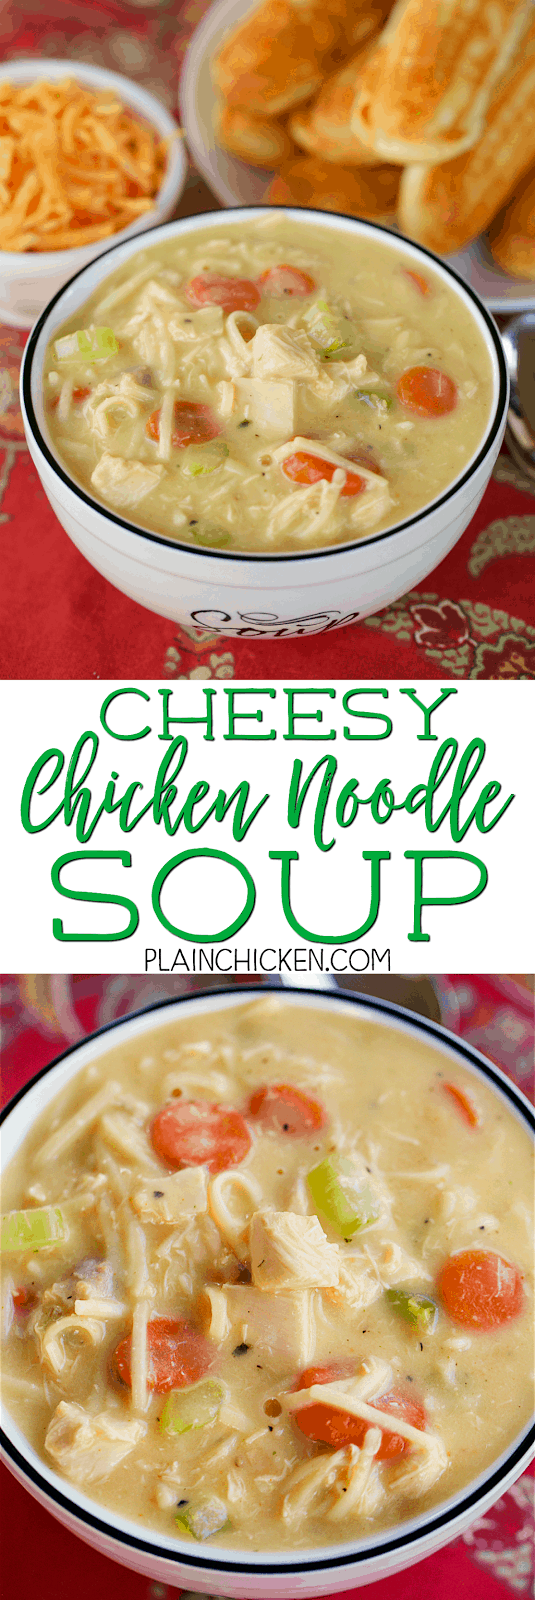 Cheesy Chicken Noodle Soup - ready in under 30 minutes! Just dump everything in the pot and let it simmer. SO easy! We LOVE this soup!!! Chicken, cheese soup, chicken broth, milk, celery, carrots, egg noodles and cheddar cheese. We make this at least once a month. 